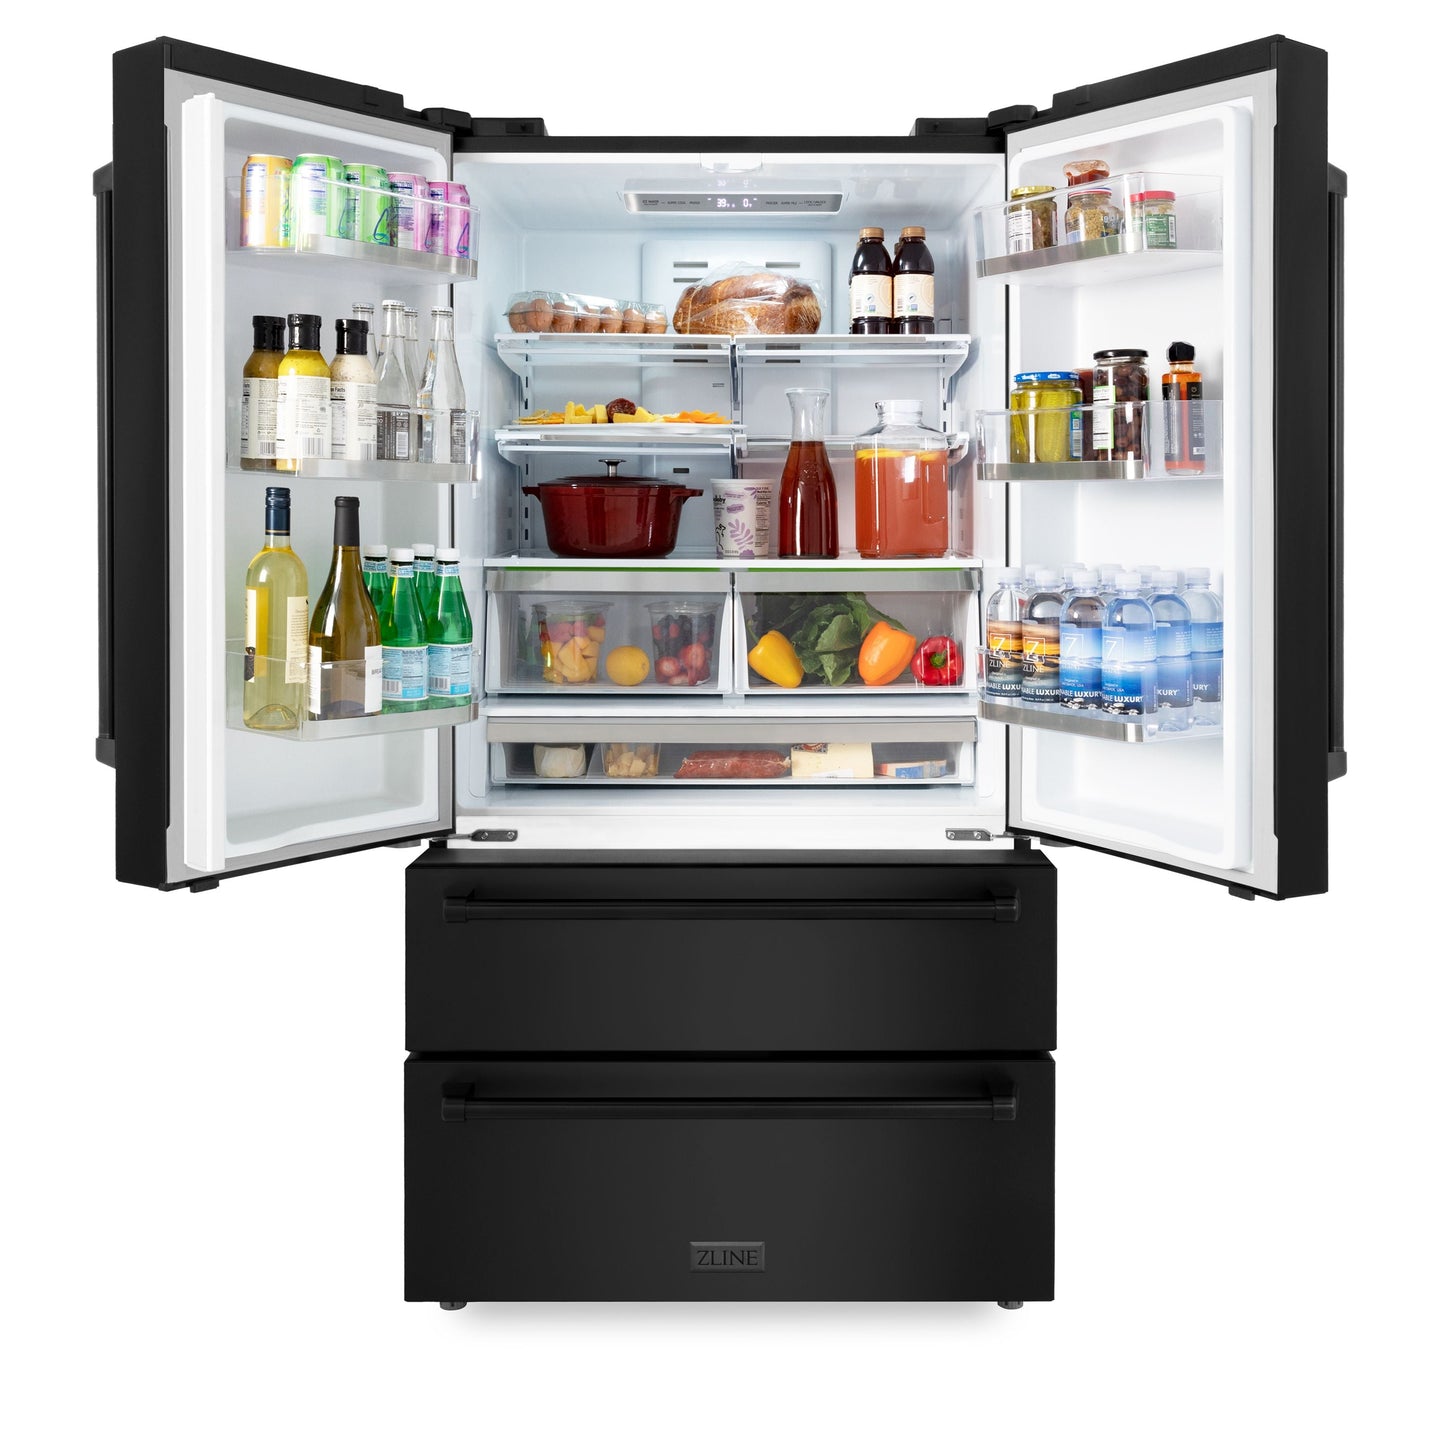 ZLINE 36 inch 22.5 cu. ft. French Door Refrigerator with Ice Maker in Black Stainless Steel